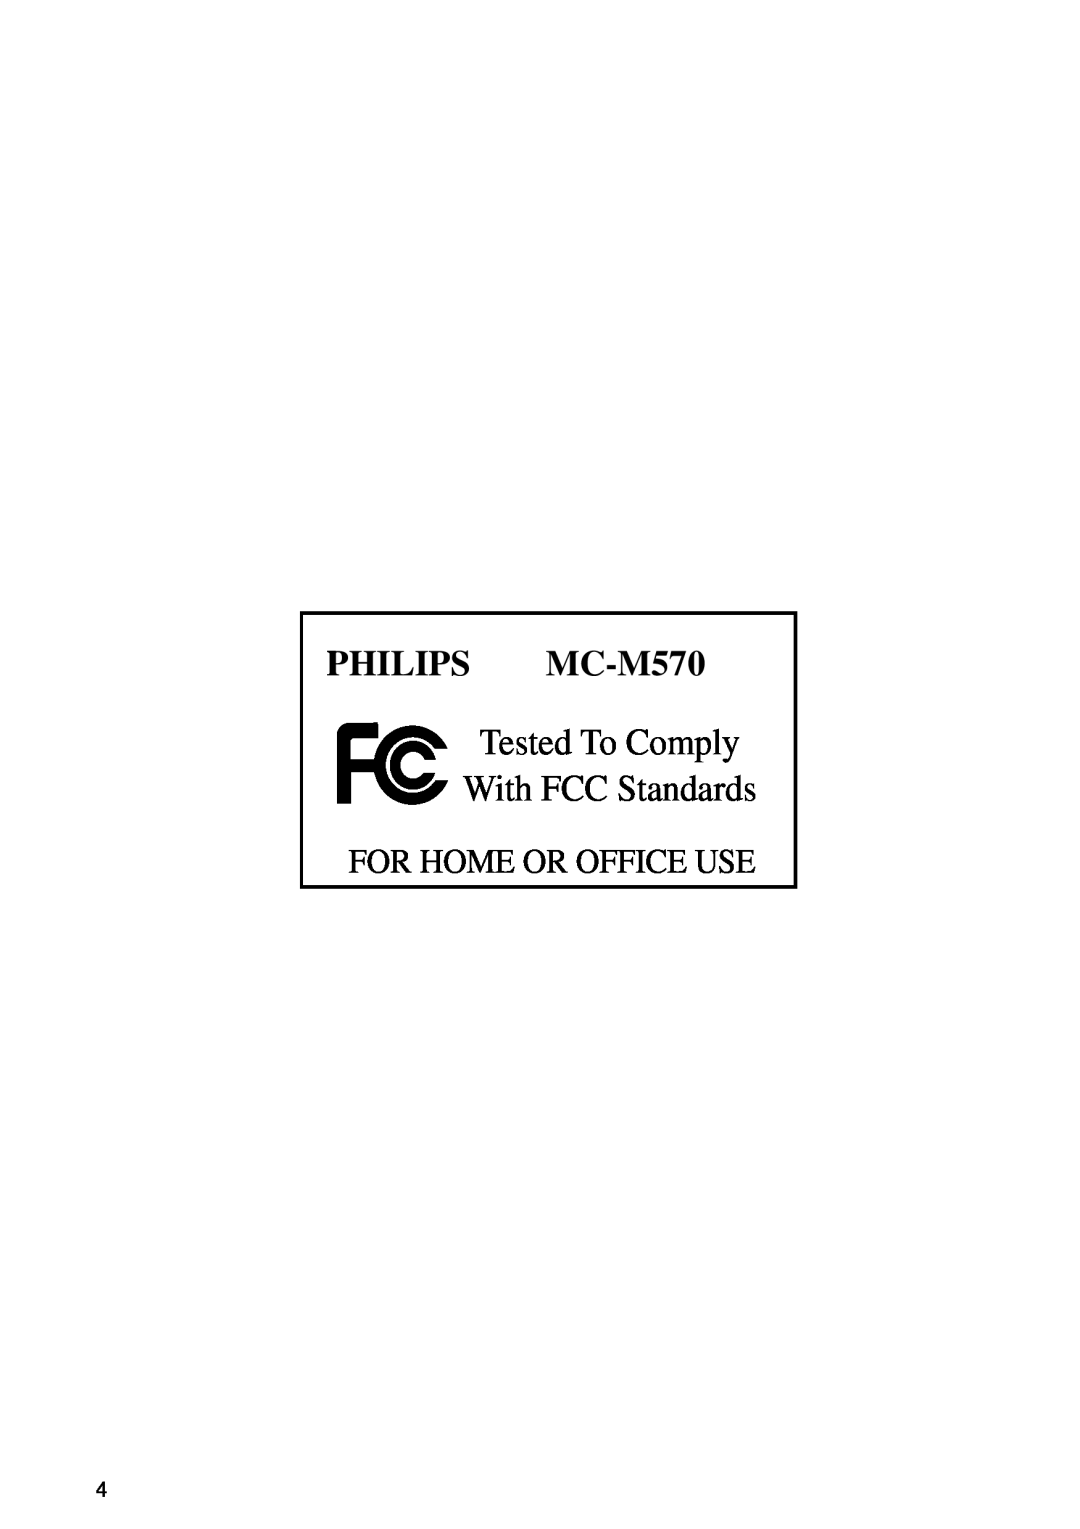 Philips MC M570 manual PHILIPS MC-M570, Tested To Comply With FCC Standards, For Home Or Office Use 